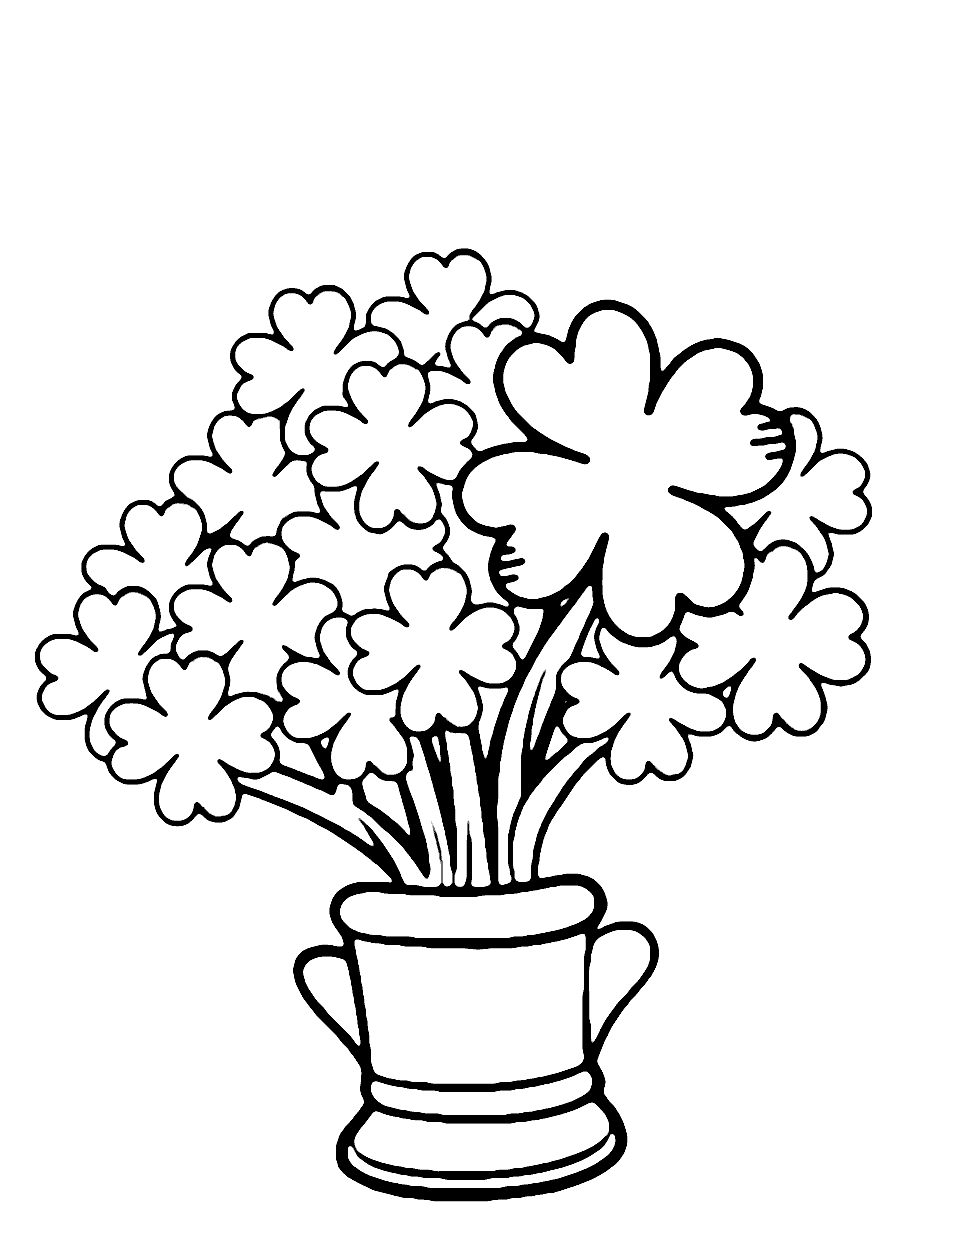 Shamrock Vase Coloring Page - A vase filled with shamrocks, one larger and more prominent than the rest.